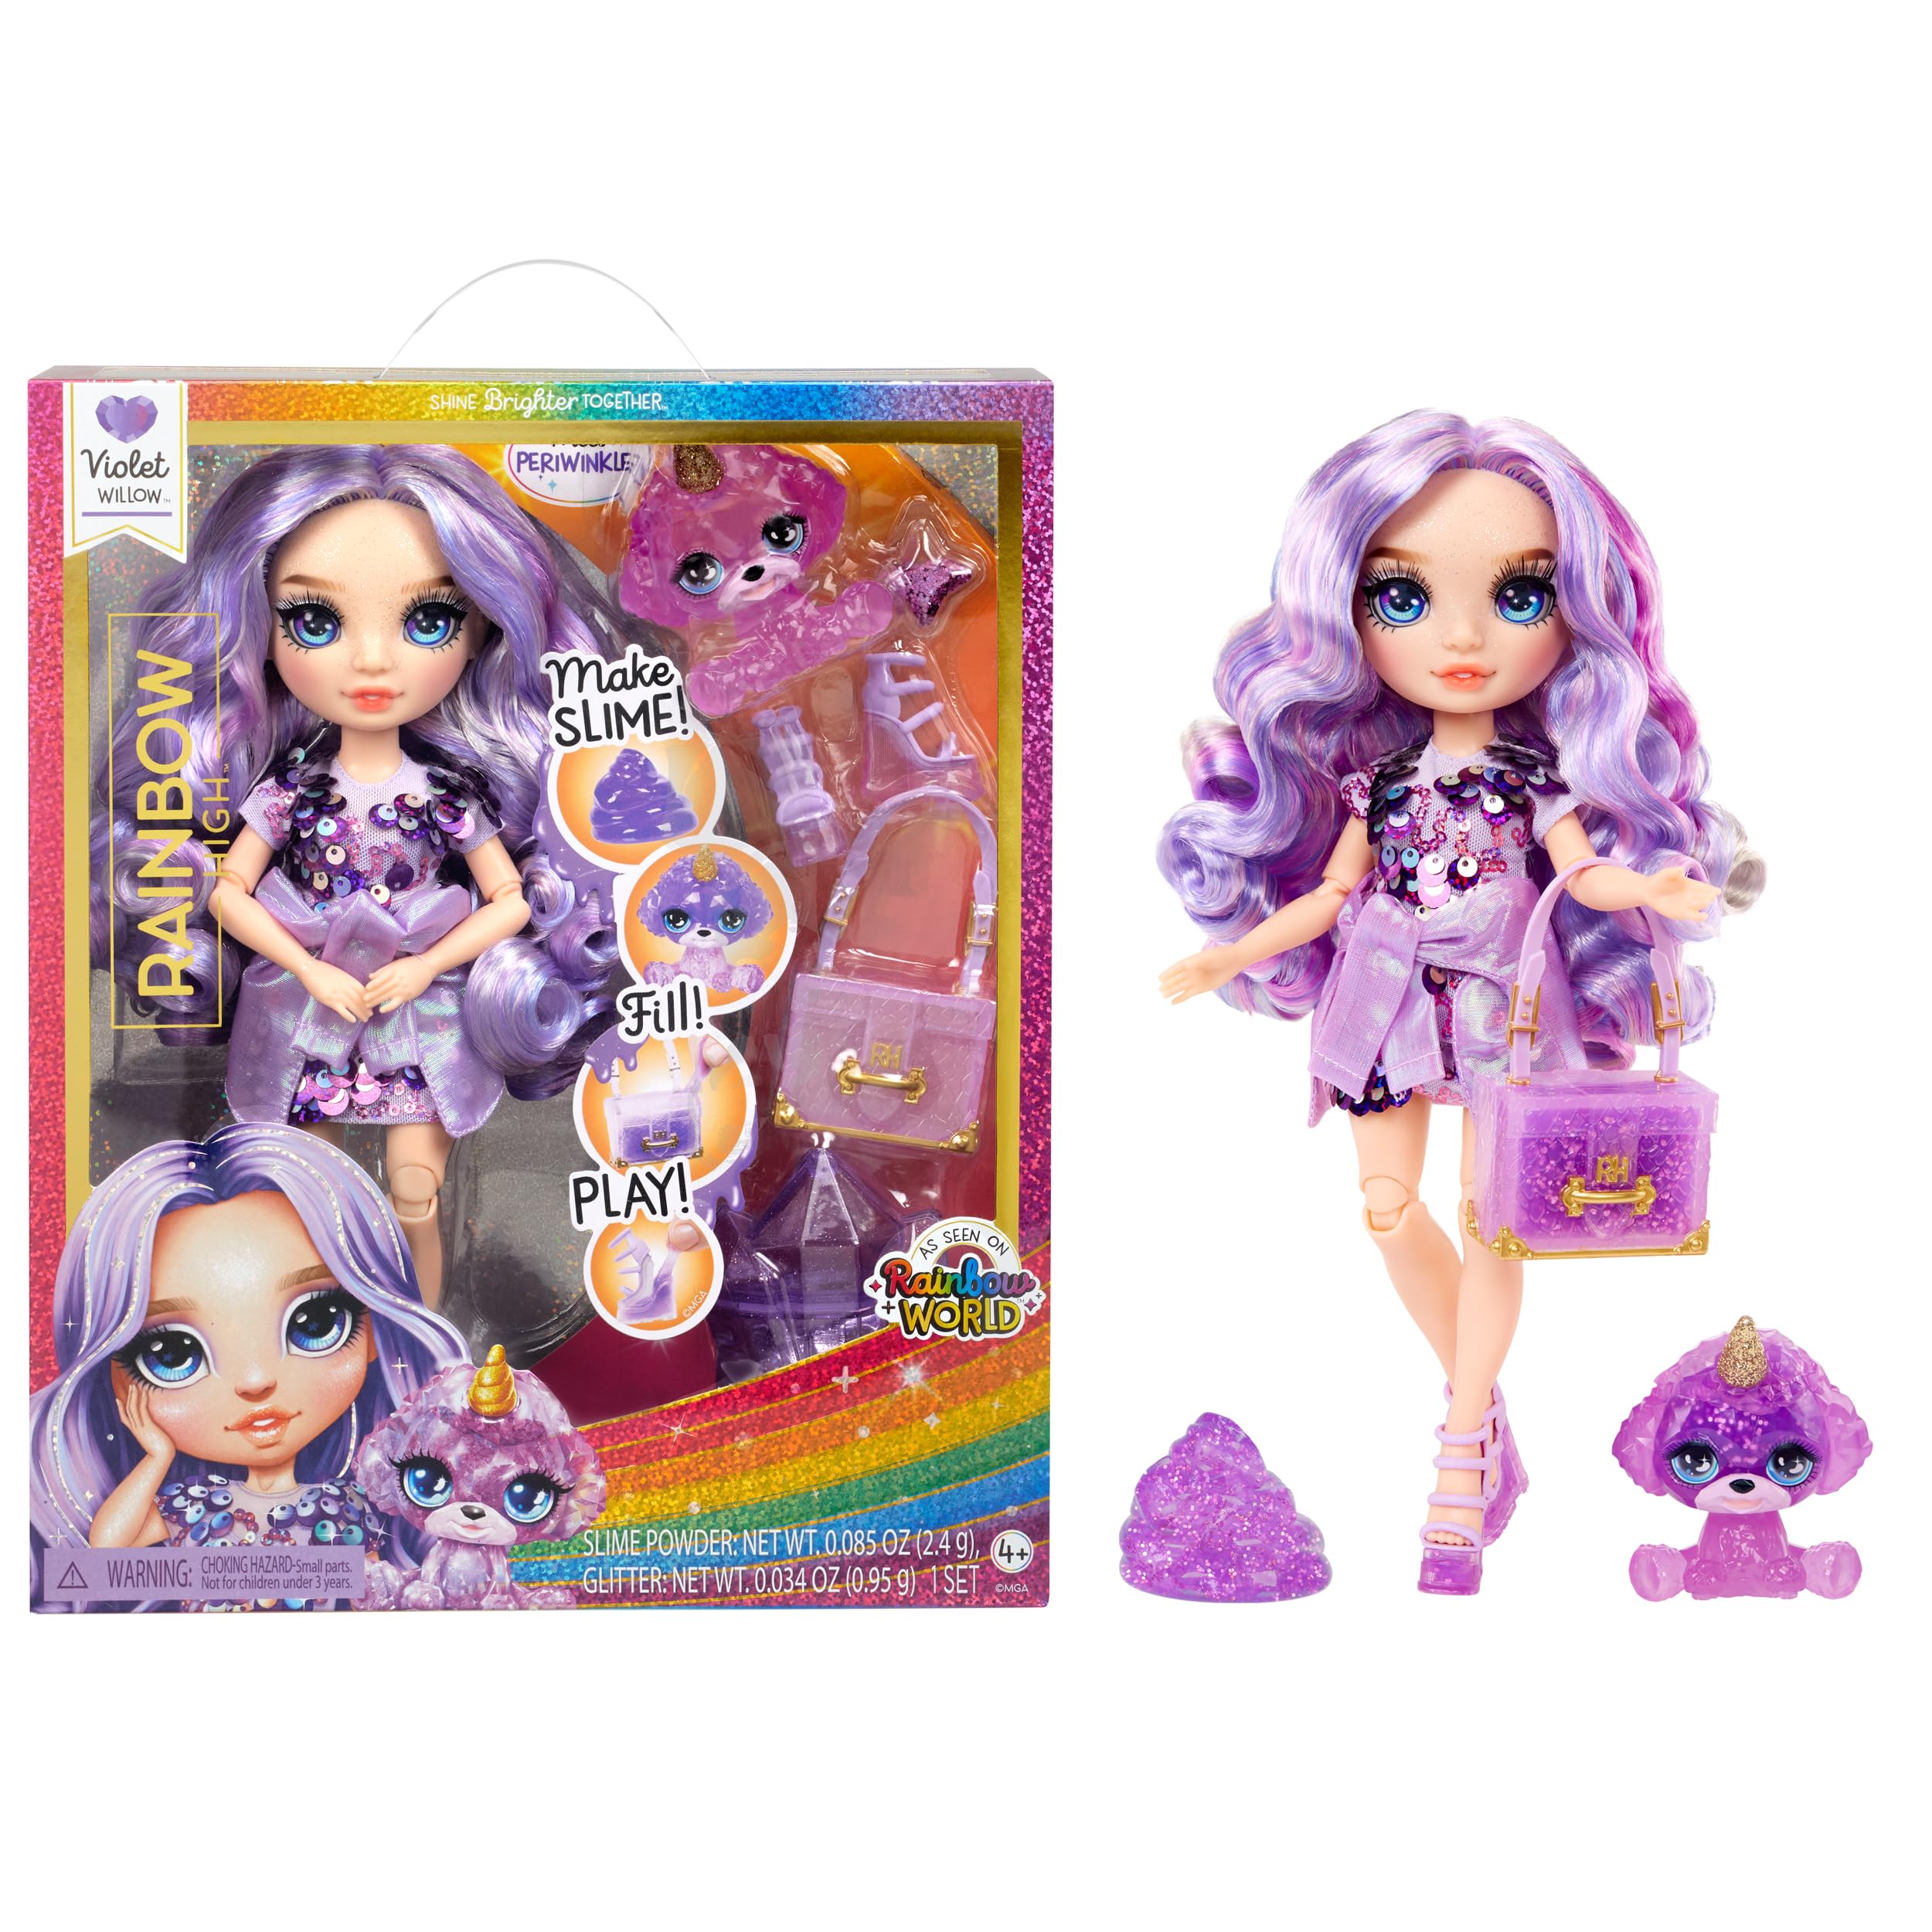 Rainbow High Violet (Purple) with Slime Kit & Pet - Purple 11” Shimmer Doll with DIY Sparkle Slime, Magical Yeti Pet and Fashion Accessories, Kids Gift 4-12 Years